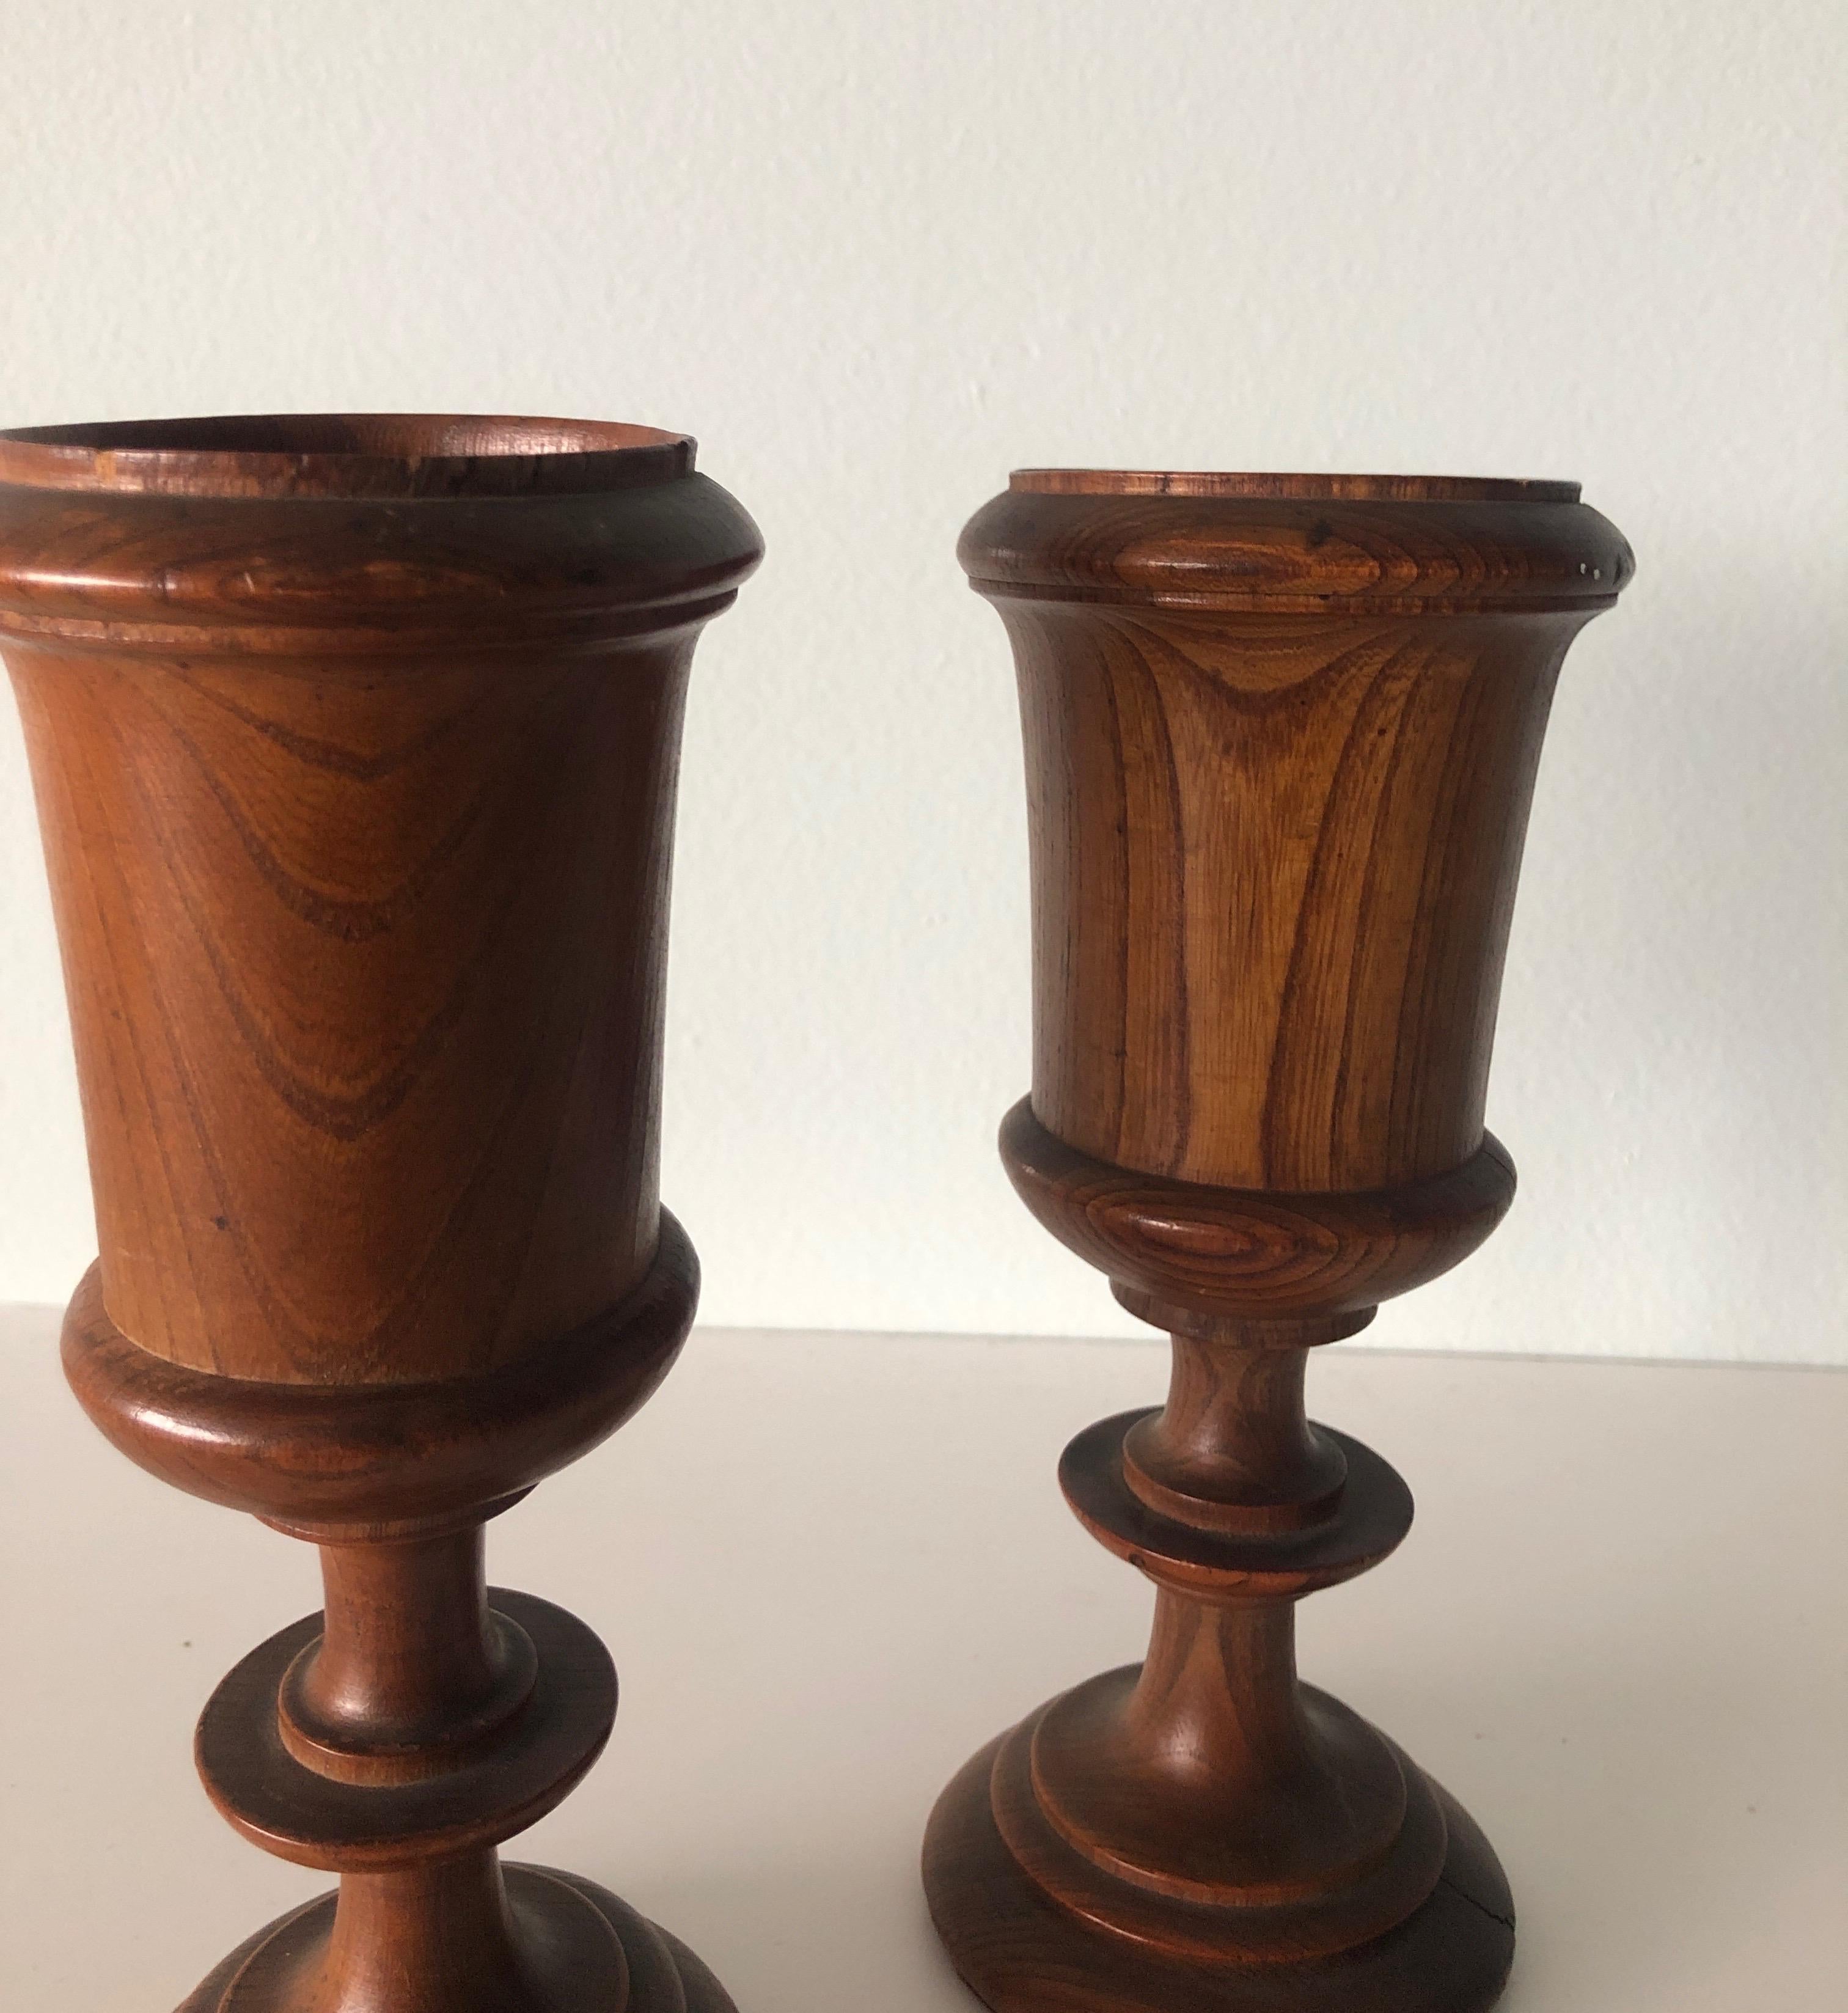 19th Century Pair of English Antique Wooden Cups